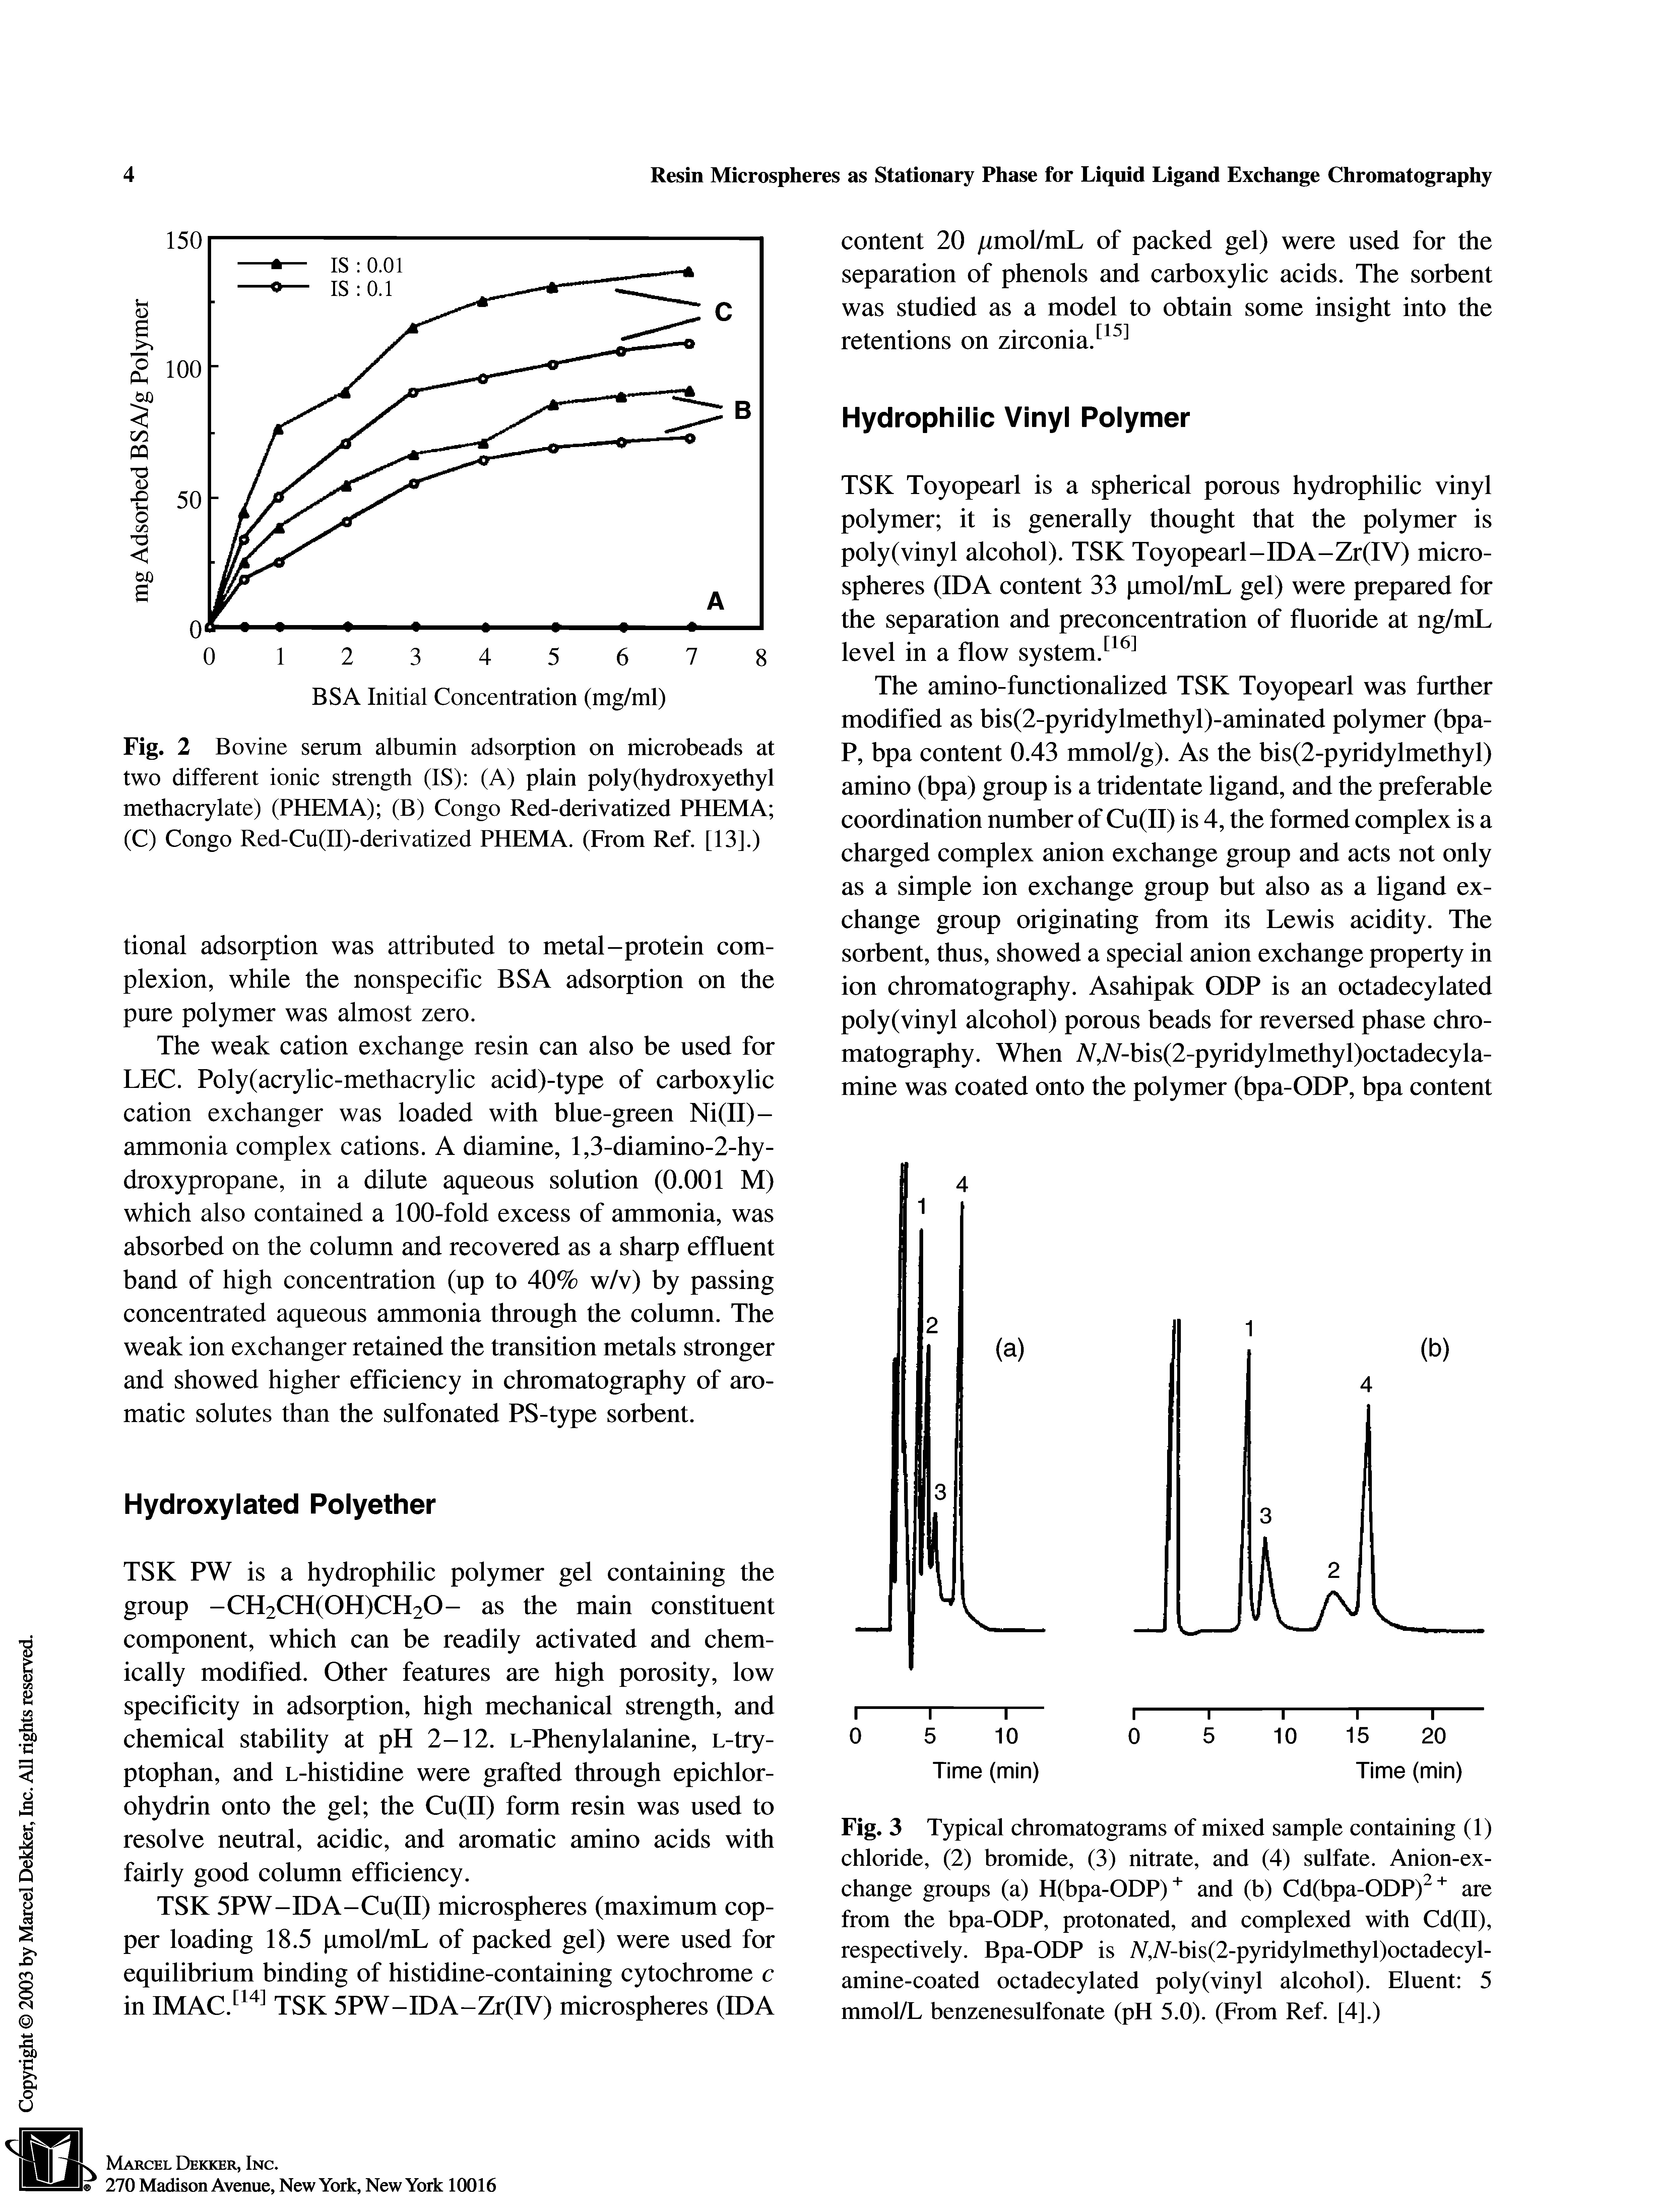 Fig. 3 Typical chromatograms of mixed sample containing (1) chloride, (2) bromide, (3) nitrate, and (4) sulfate. Anion-ex-change groups (a) H(bpa-ODP) and (b) Cd(bpa-ODP) are from the bpa-ODP, protonated, and complexed with Cd(II), respectively. Bpa-ODP is A,A-bis(2-pyridylmethyl)octadecyl-amine-coated octadecylated poly (vinyl alcohol). Eluent 5 mmol/L benzenesulfonate (pH 5.0). (From Ref. [4].)...